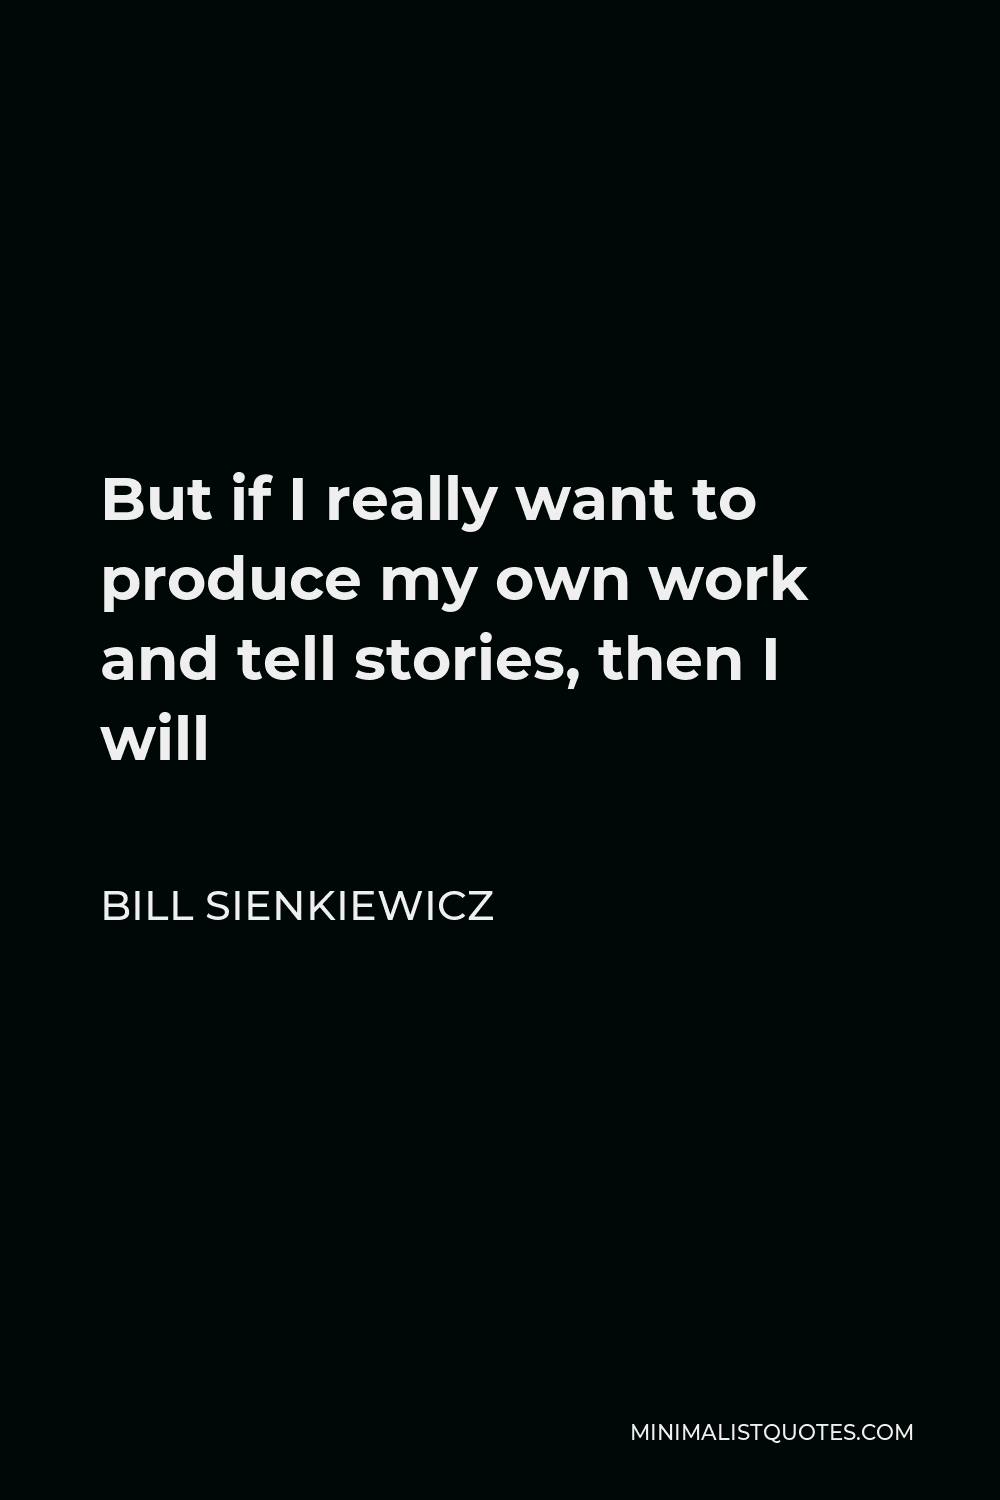 Bill Sienkiewicz Quote - But if I really want to produce my own work and tell stories, then I will